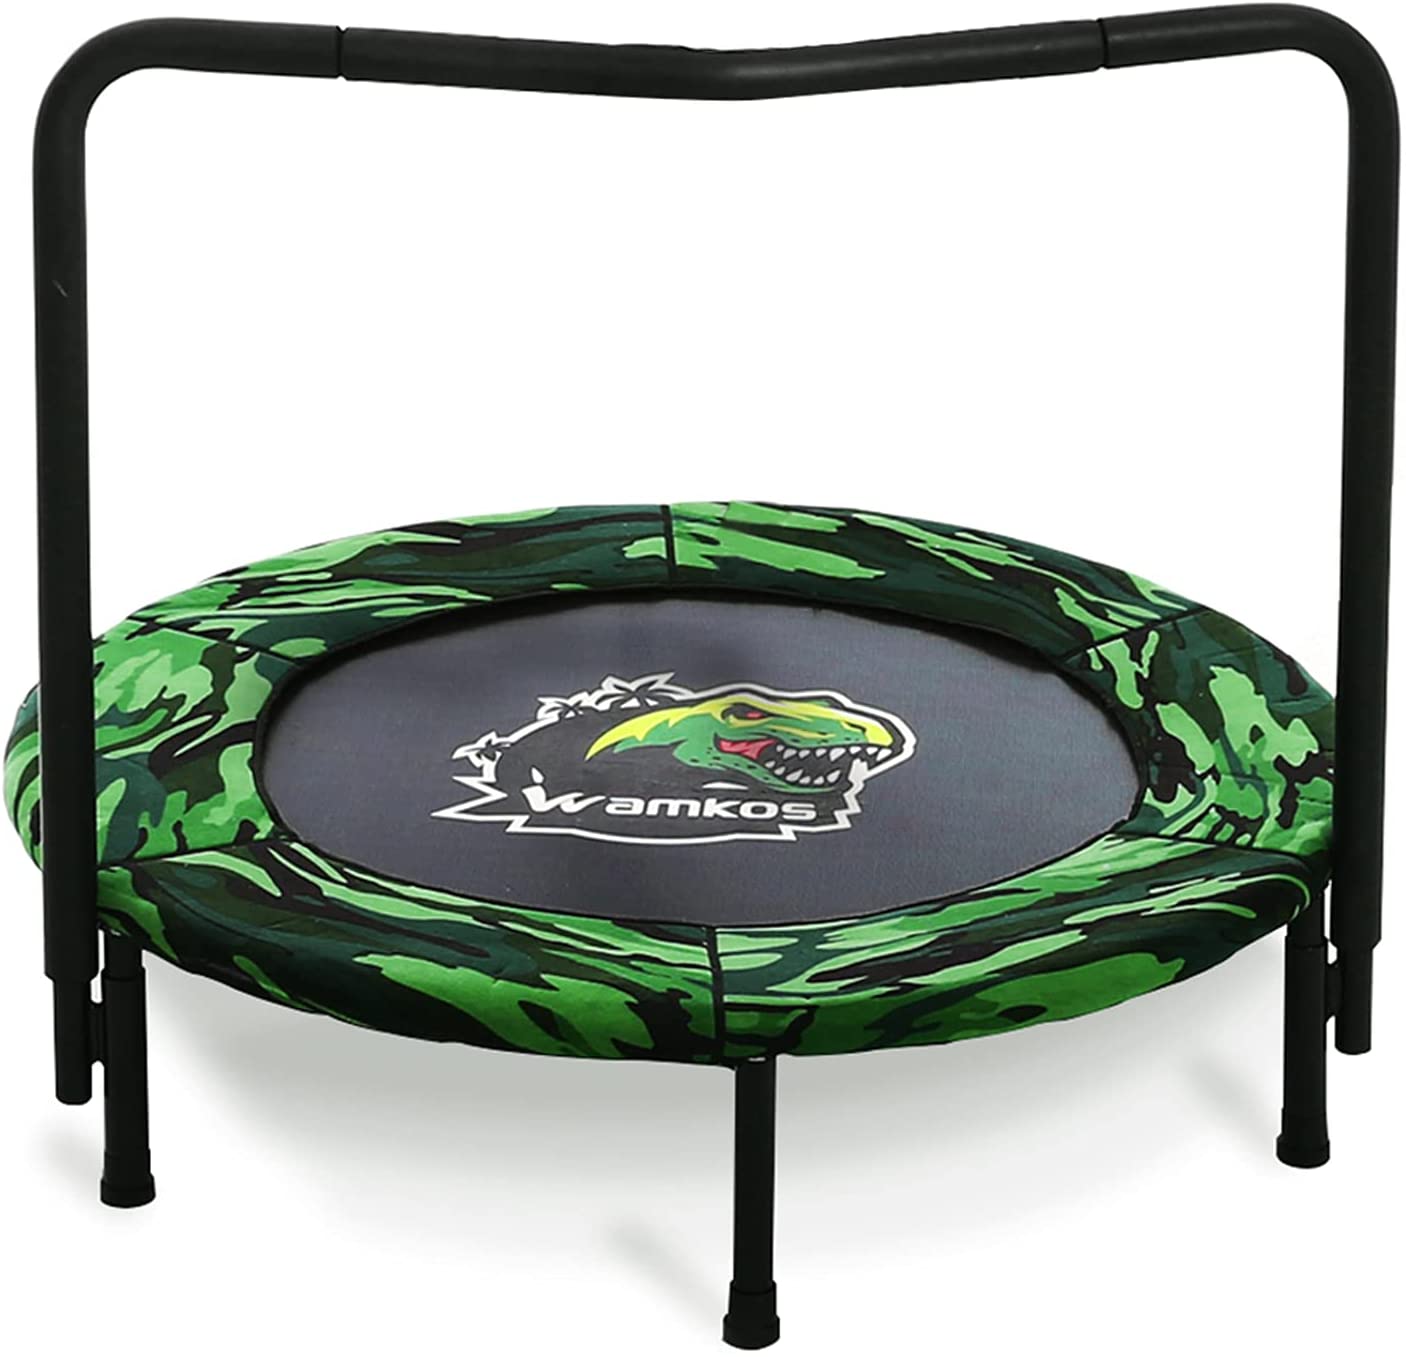 2022 Upgraded Dinosaur Mini Trampoline for Kids with Handle-b3d95123